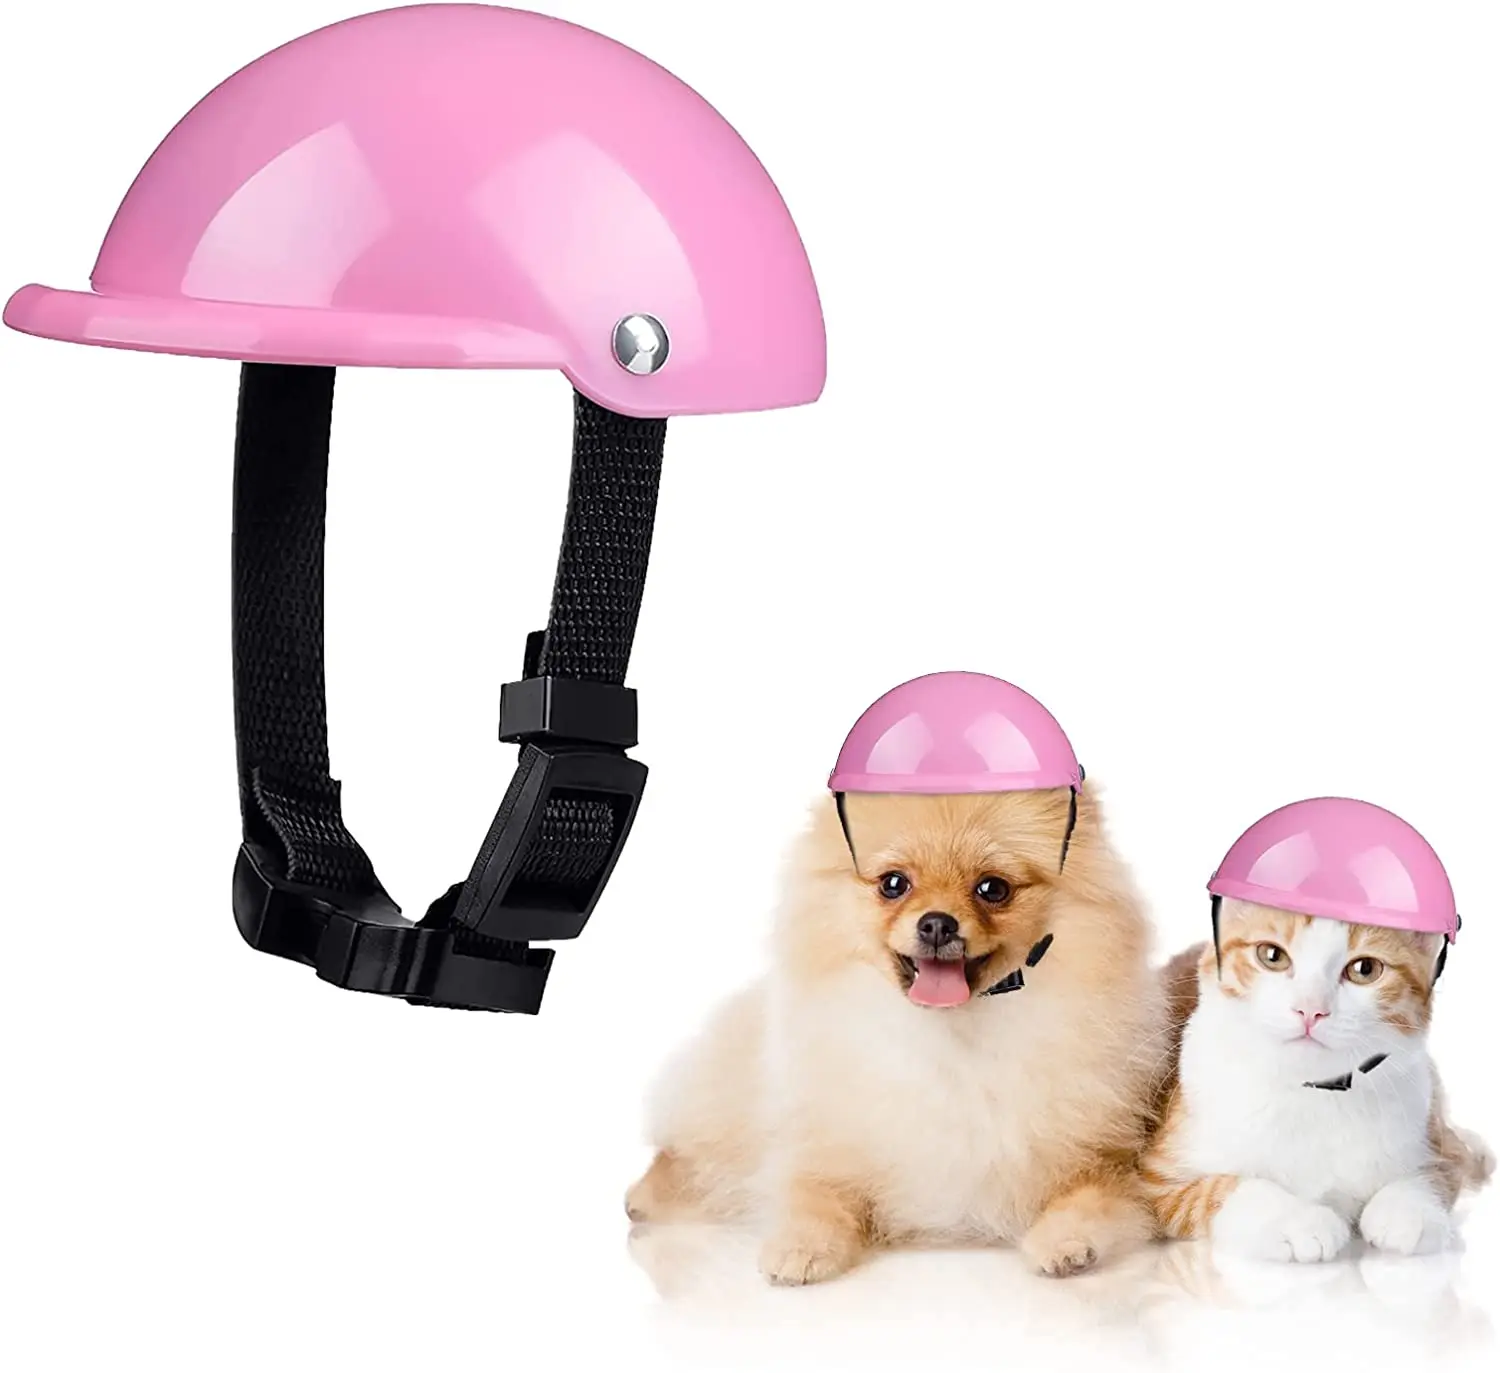 ATUBAN Pet Dog Helmet Doggie Hardhat for Puppy Chihuahua Blind Dogs Ridding Motorcycles Bike Outdoor for Small Medium Dog